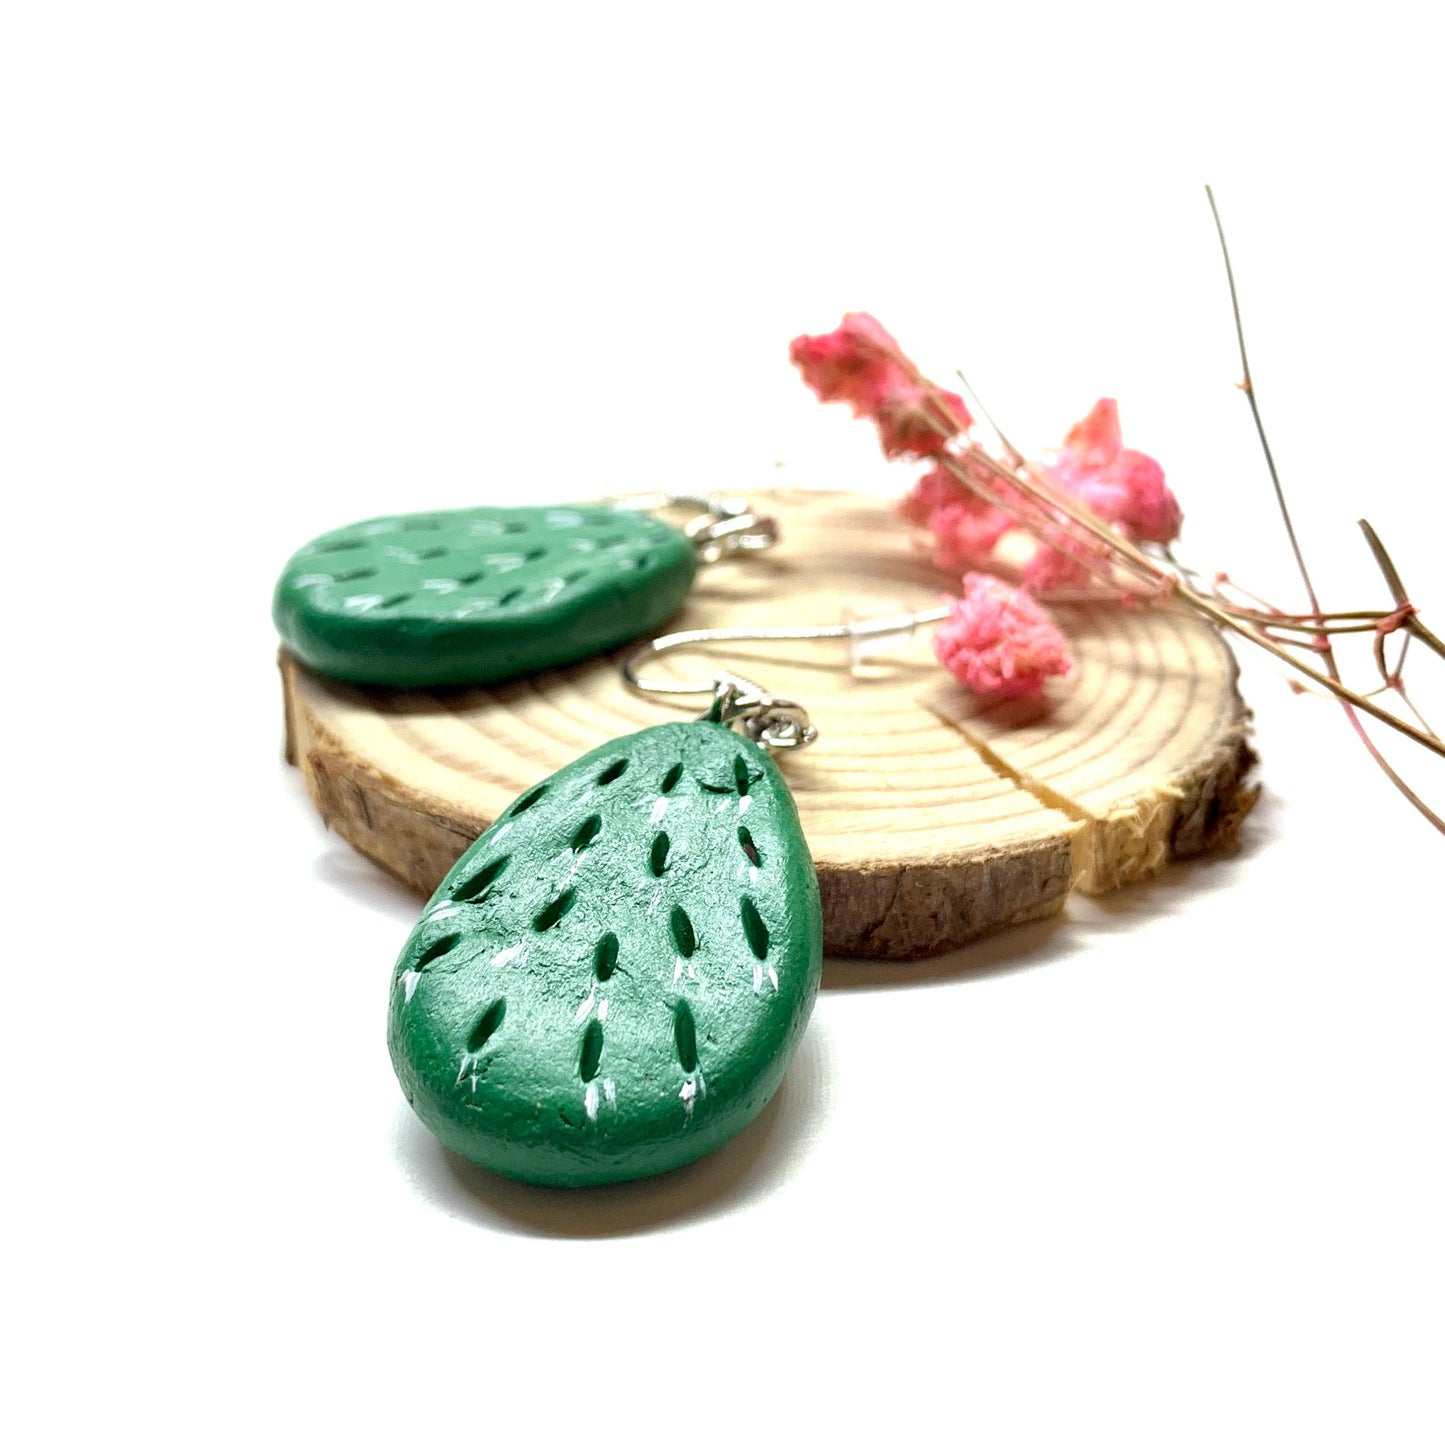 Ethnic Green Cactus Clay Earrings Mexican Folk Art Hand Painted Food Jewelry Nopales Aretes Mexico Artisan Wearable Art Women Girl's Fashion